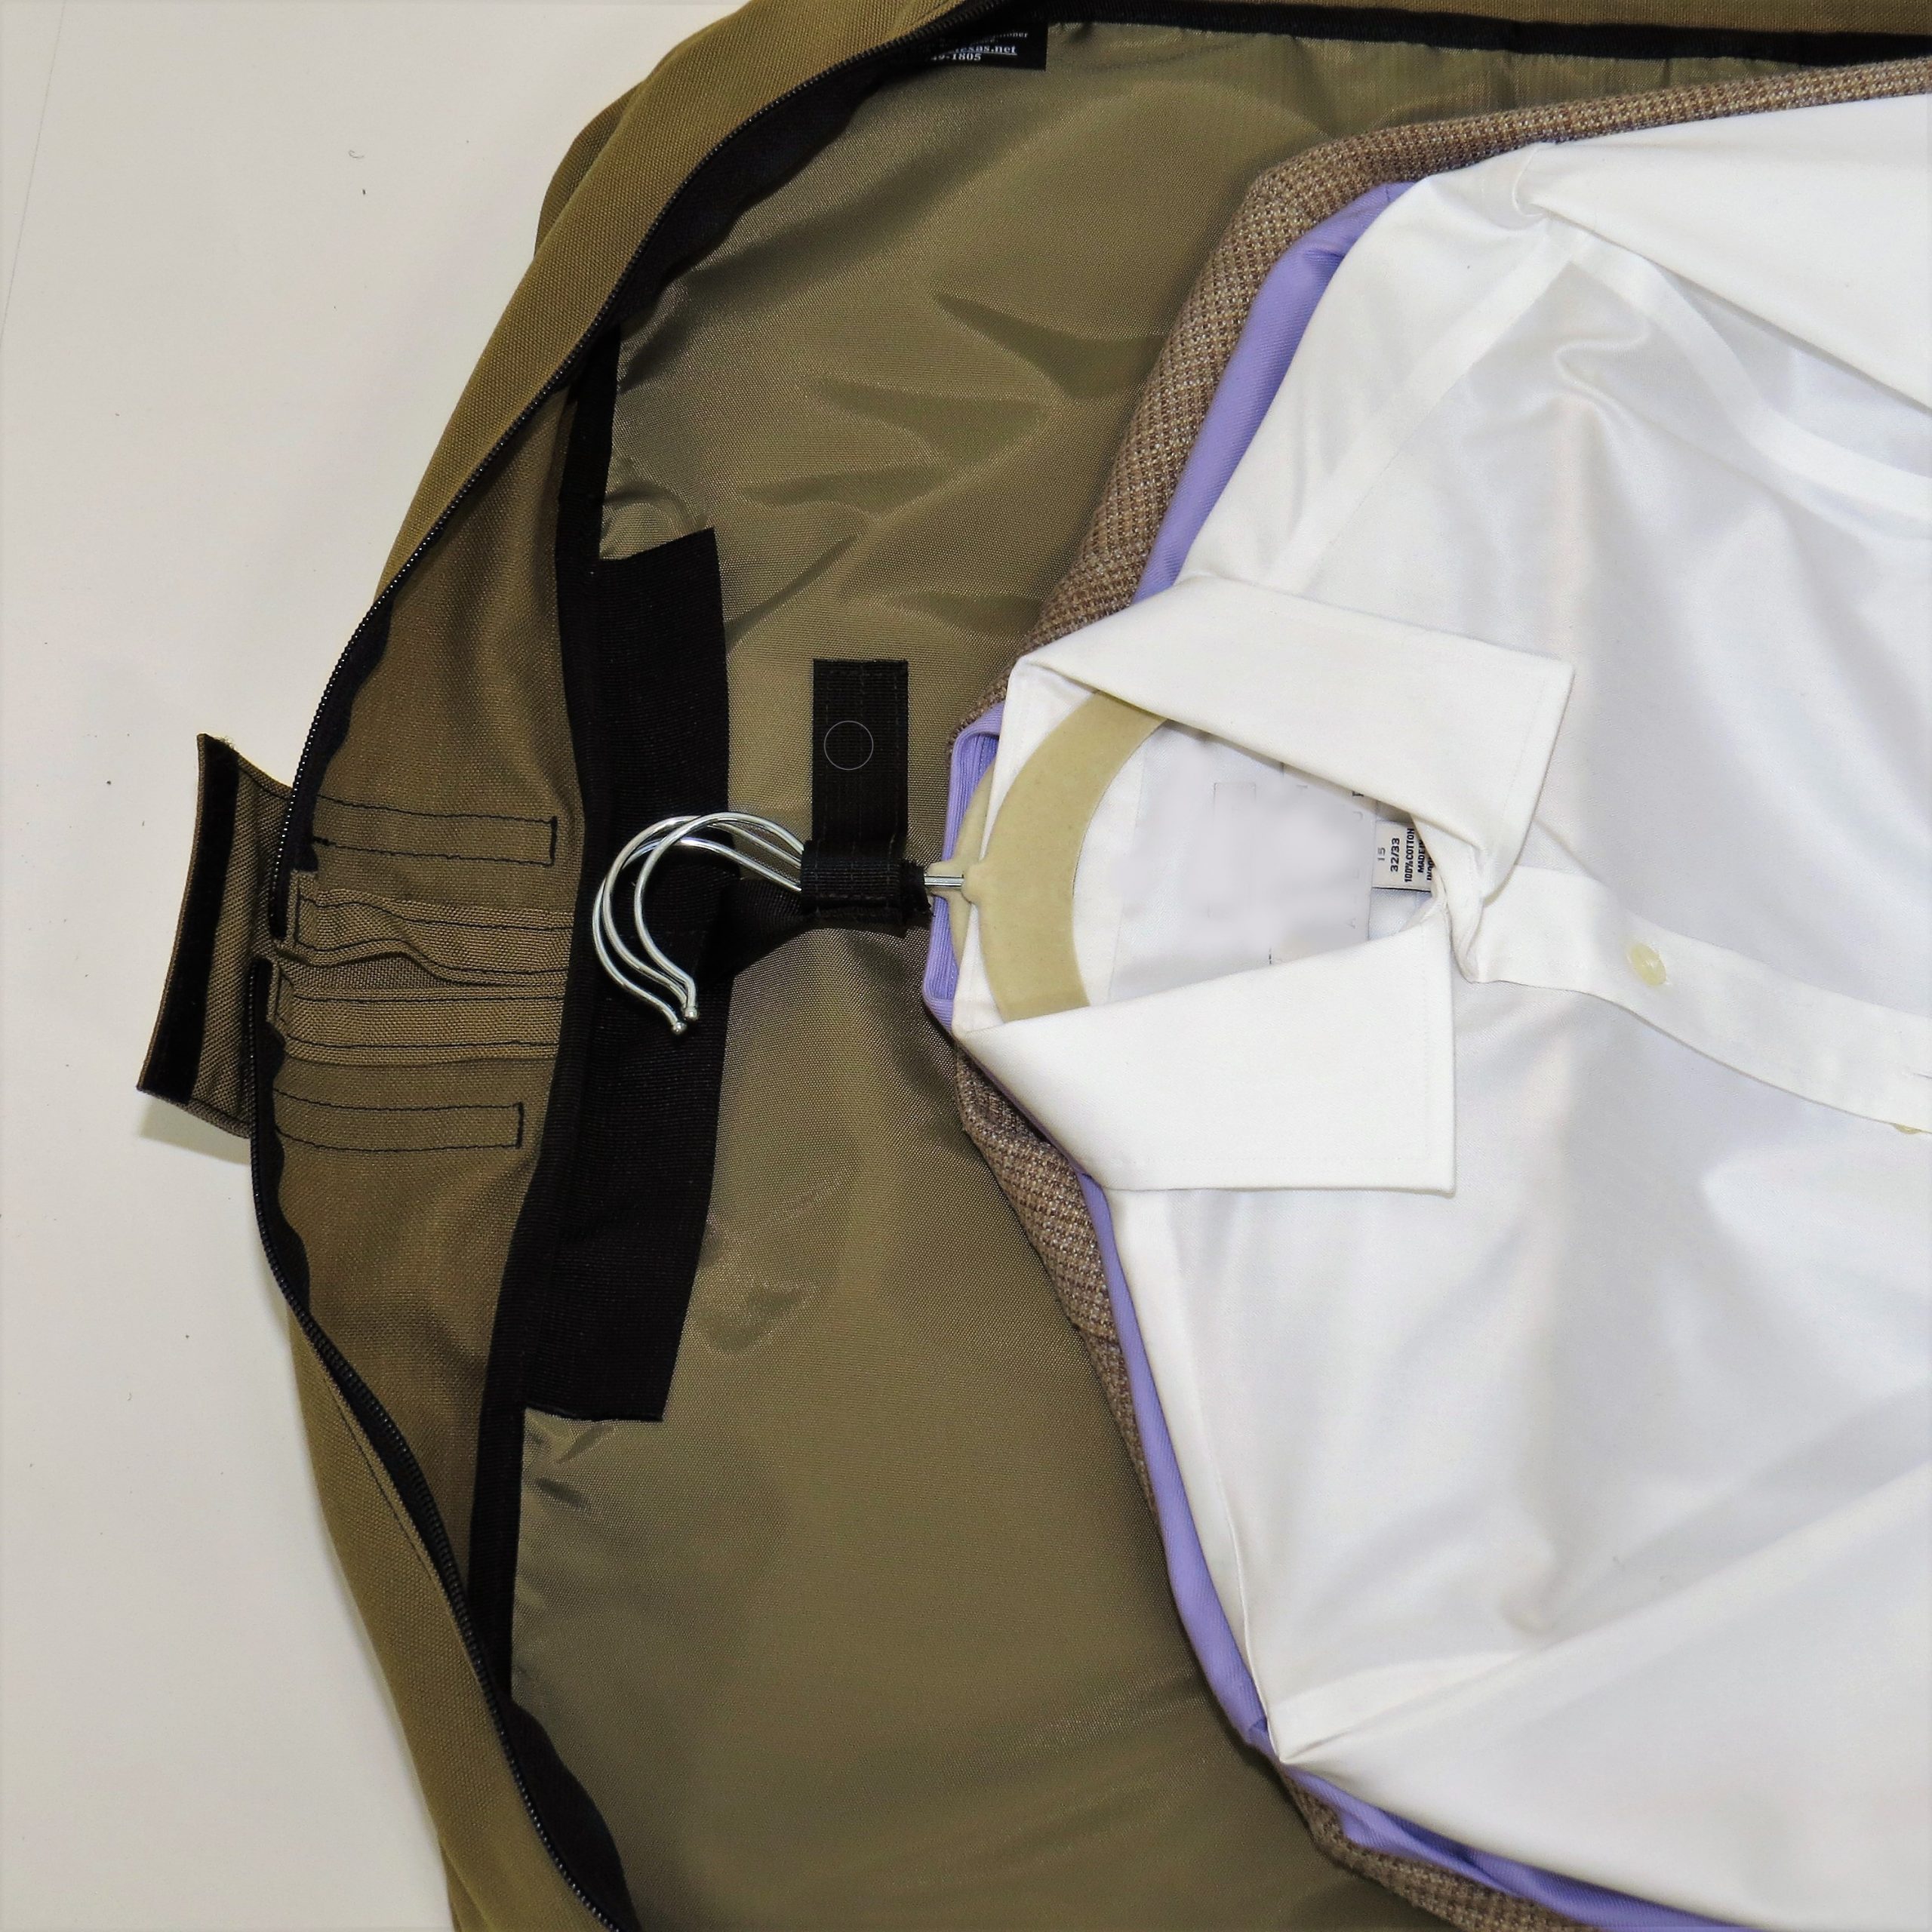 Travel Suit Bag with Full Leather Trim (Pictured in Long)